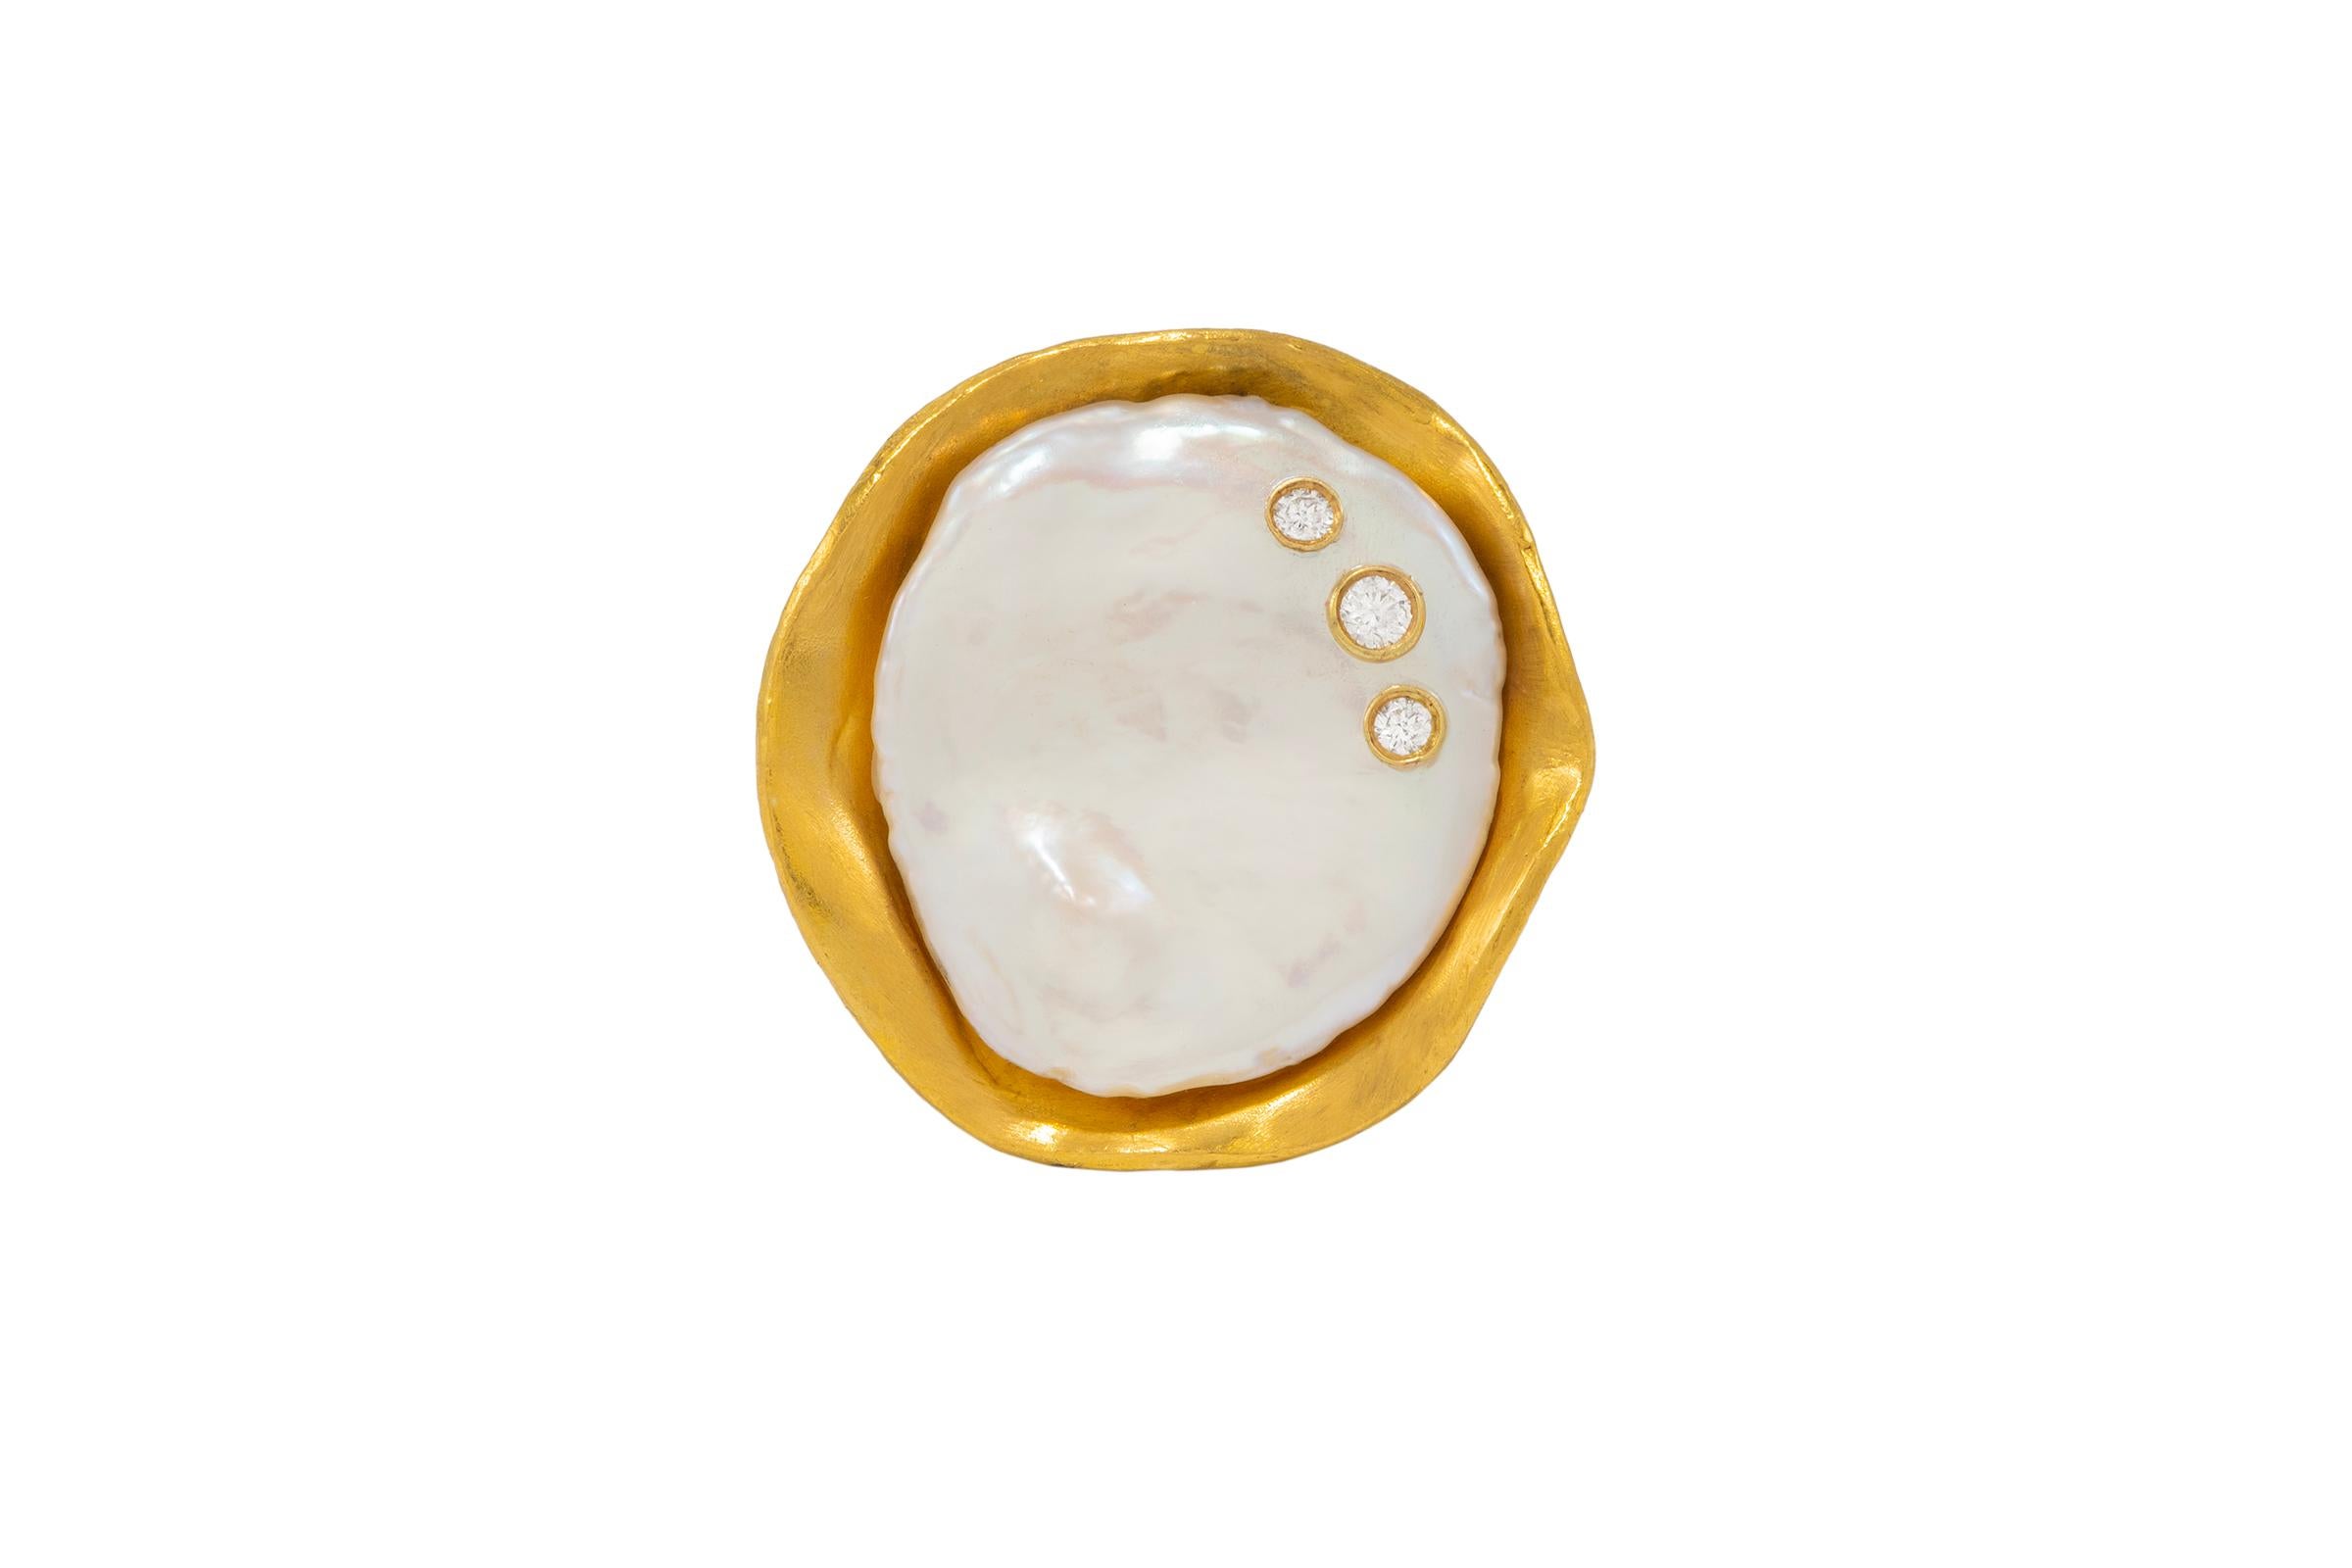 Diamond and Pearl Cocktail Ring in 22k Gold, by Tagili In New Condition For Sale In New York, NY